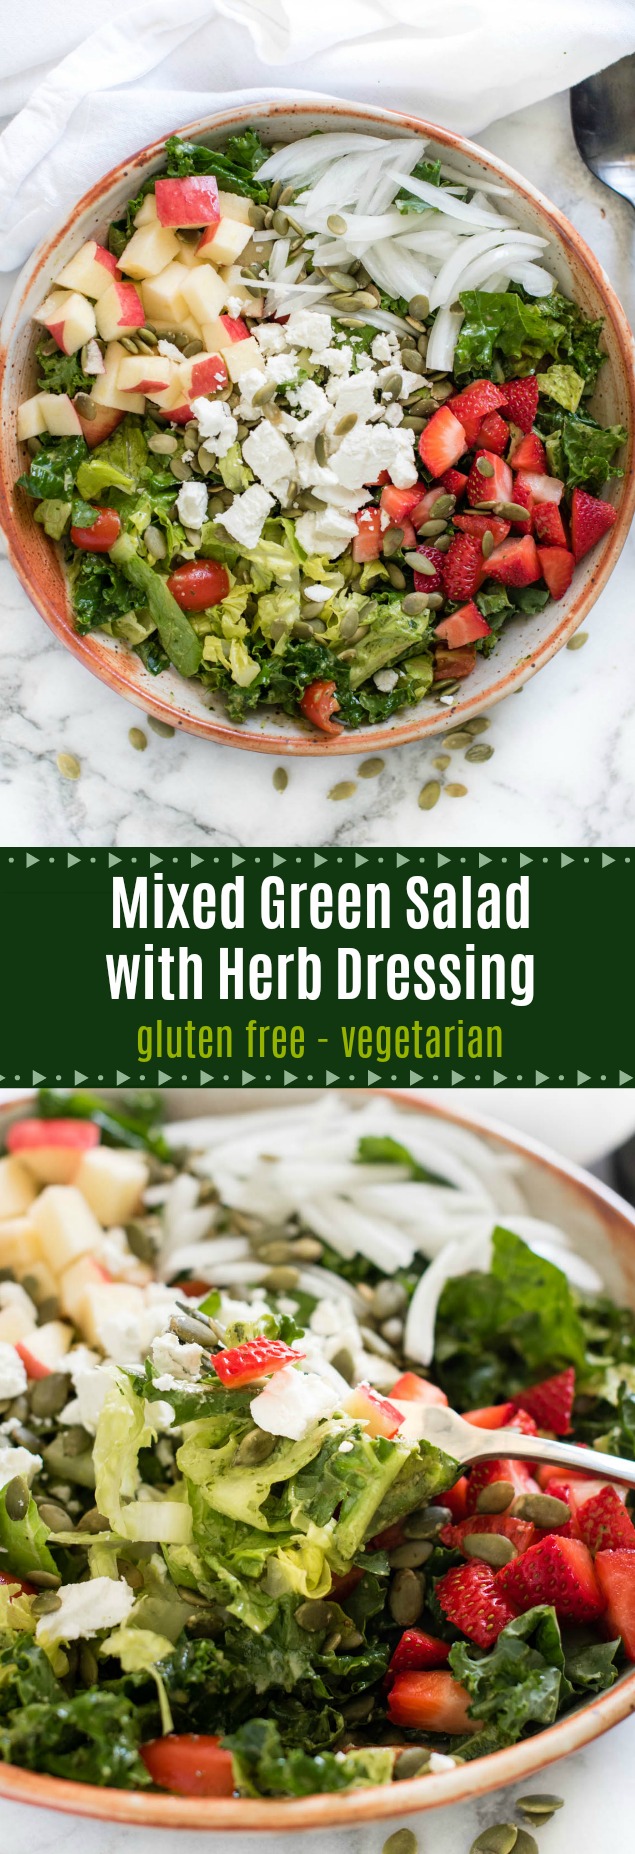 Mixed Green Salad with Strawberry, Apple and Herb Dressing 